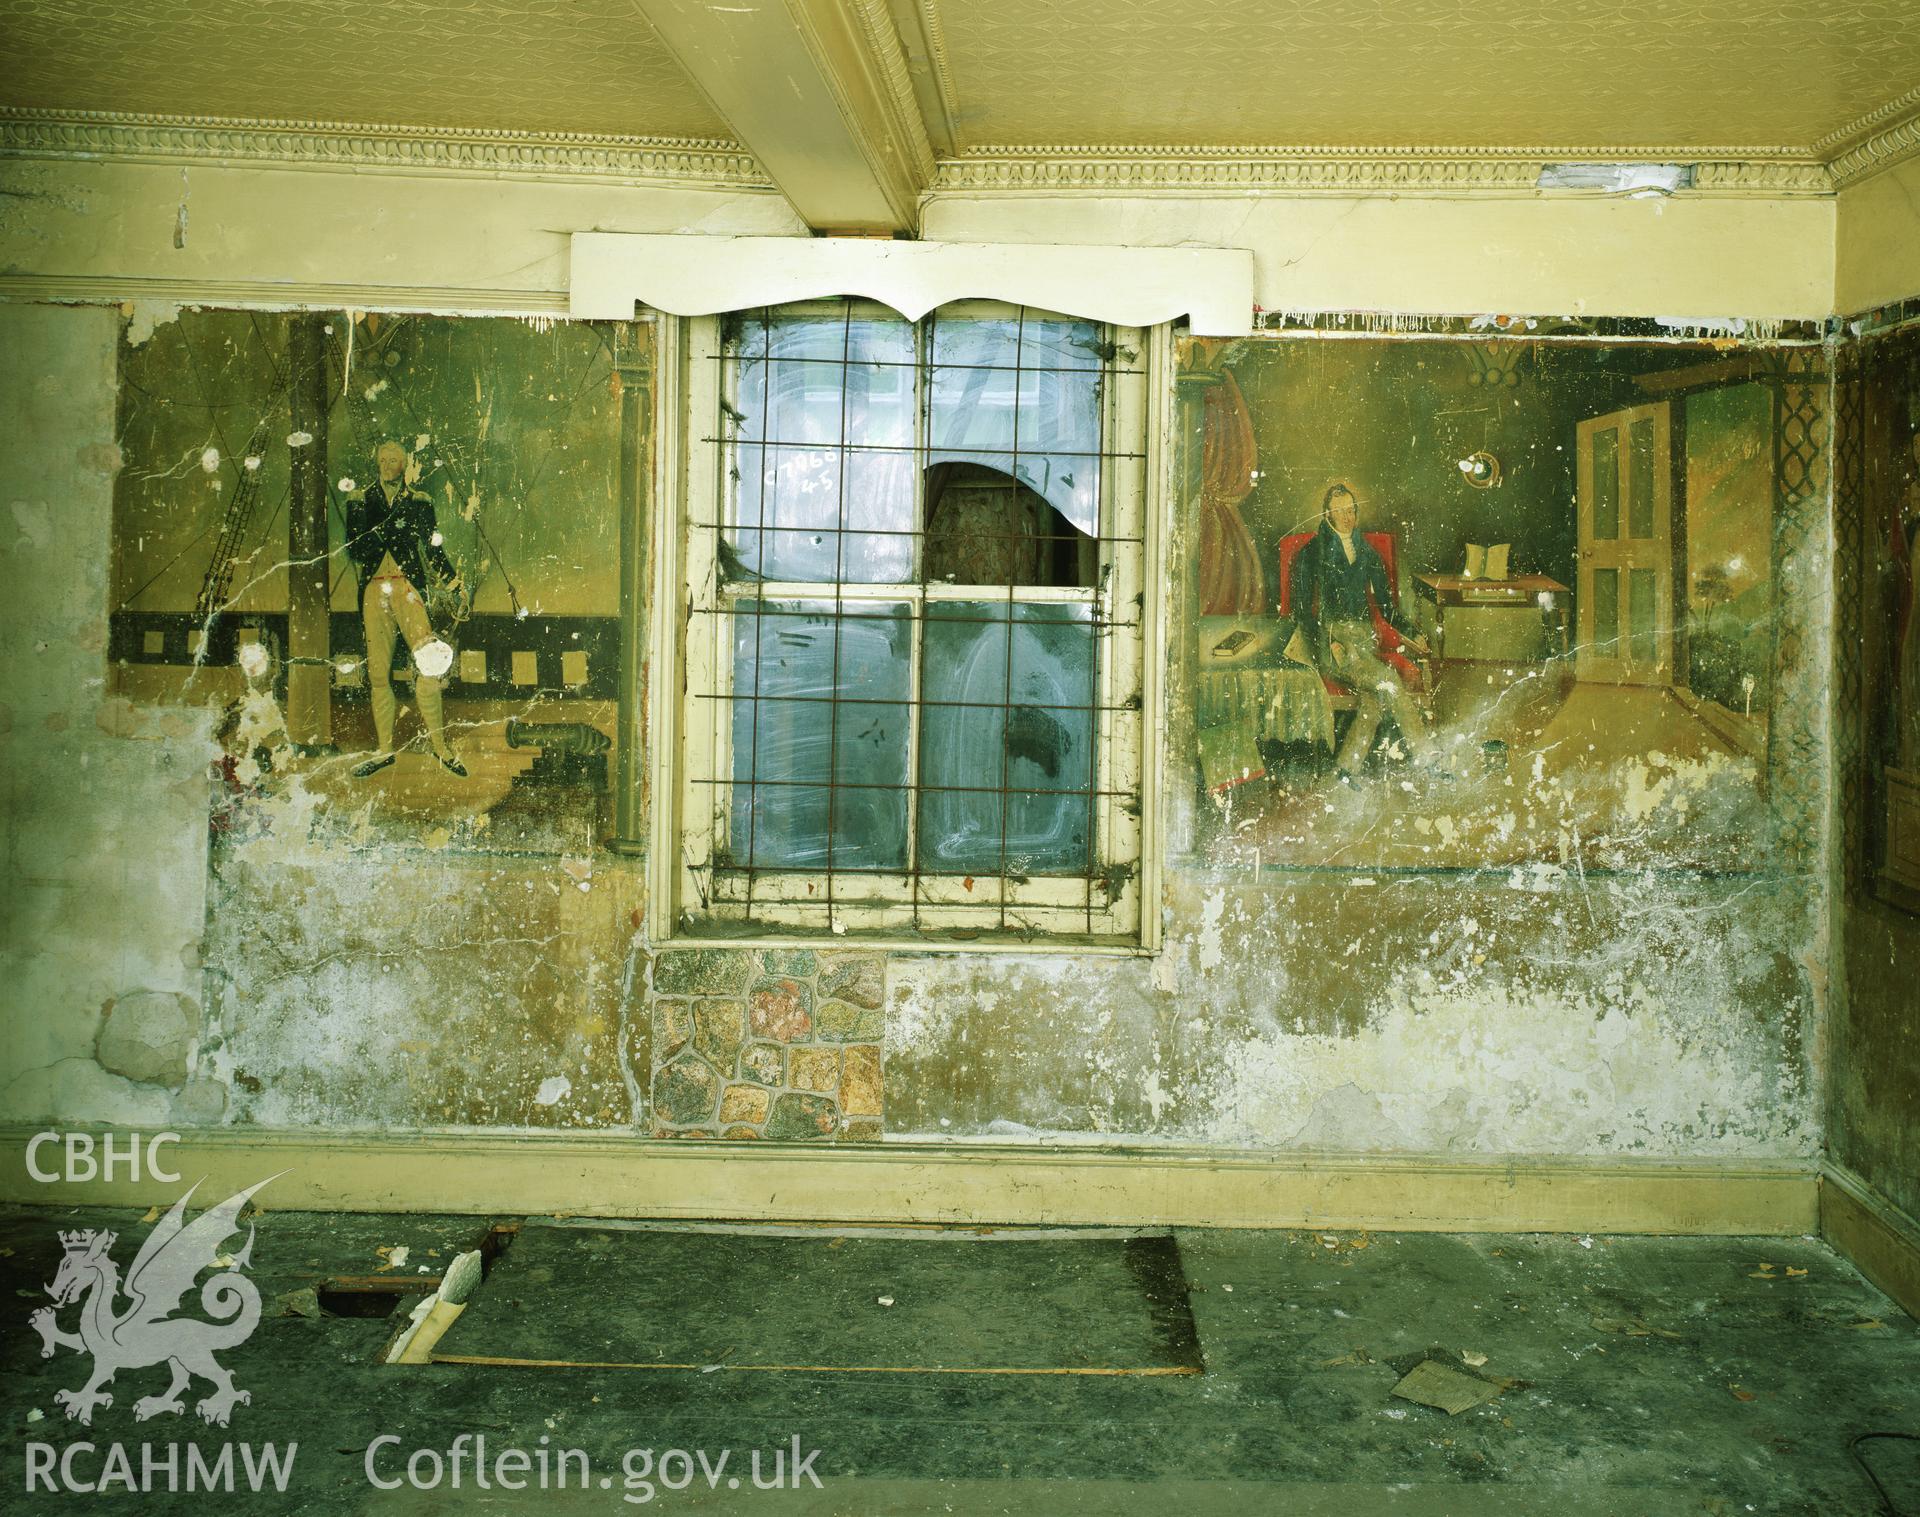 RCAHMW colour transparency showing wallpaintings at Elwy Bank, St Asaph, photographed by Iain Wright, November 2003.